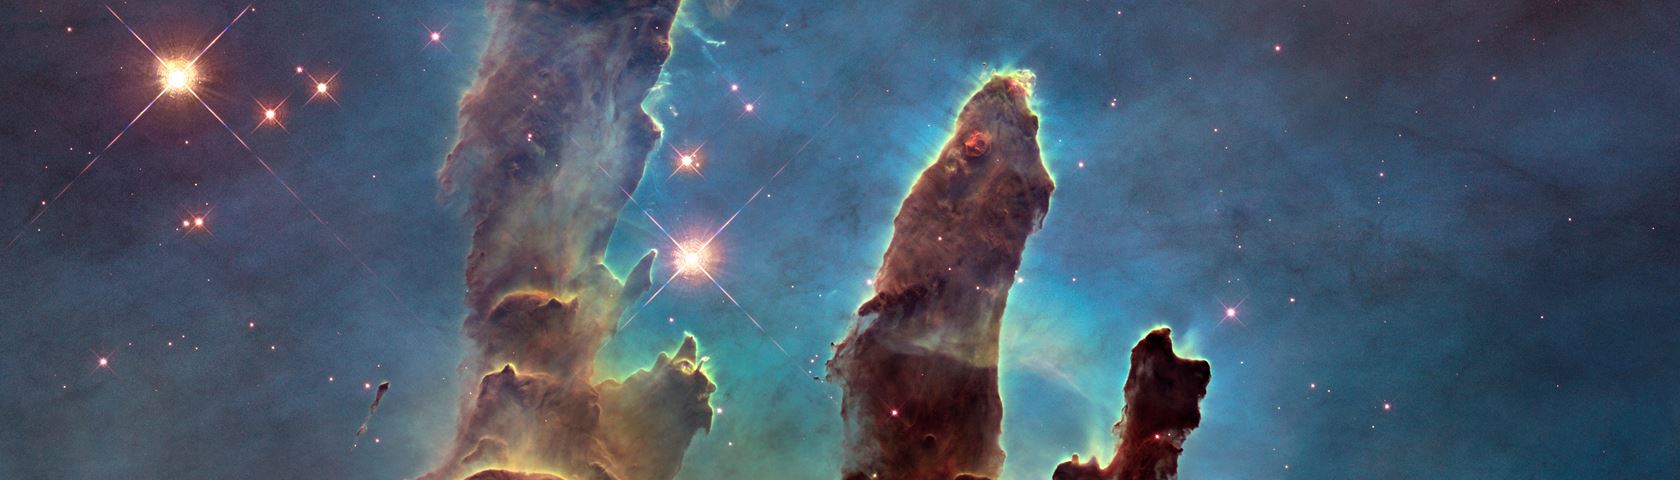 Pillars Of Creation Image Wallpaperfusion By Binary